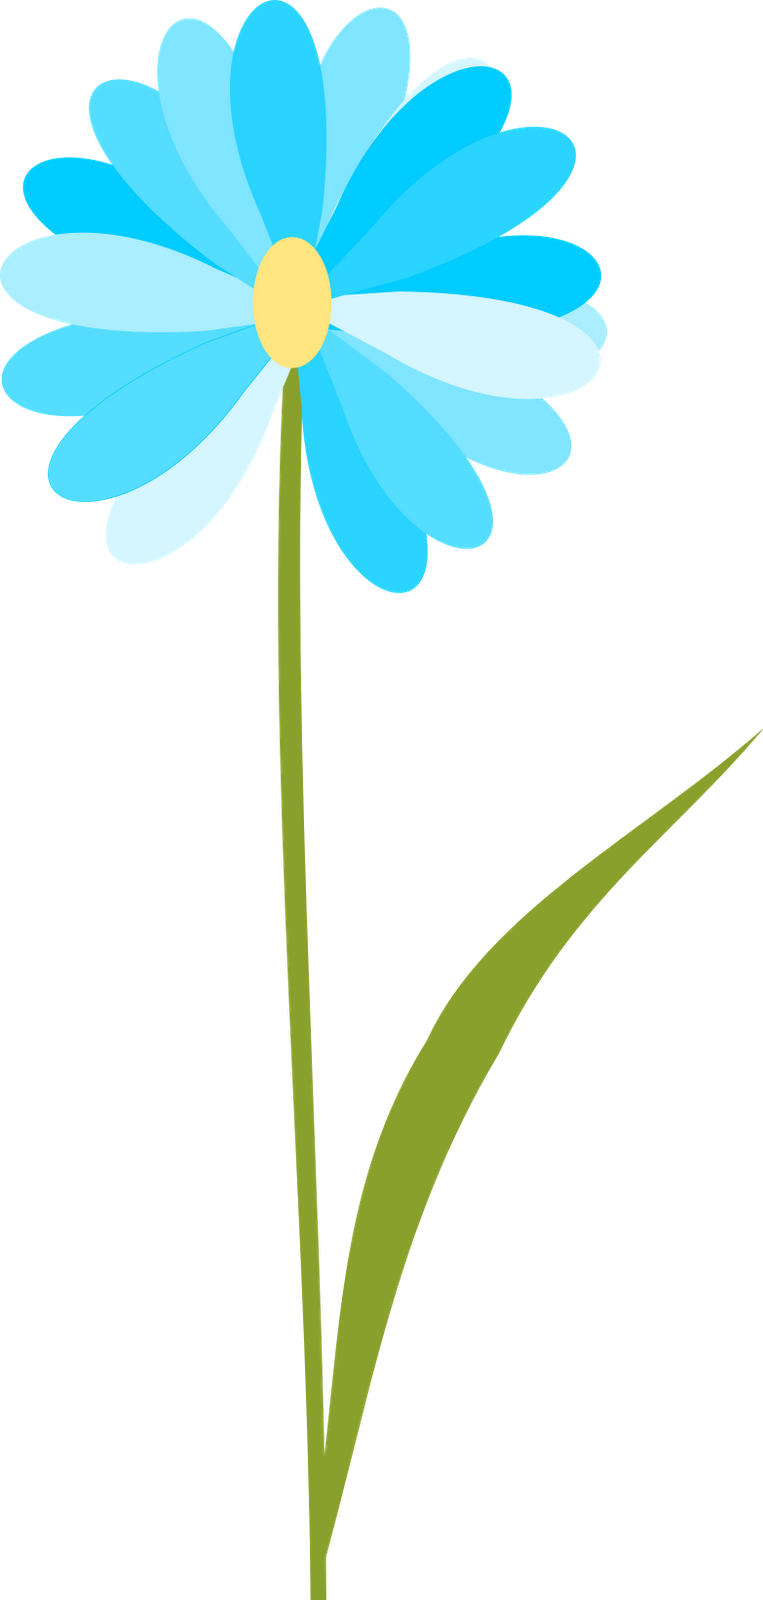 flower clipart with transparent background - photo #1